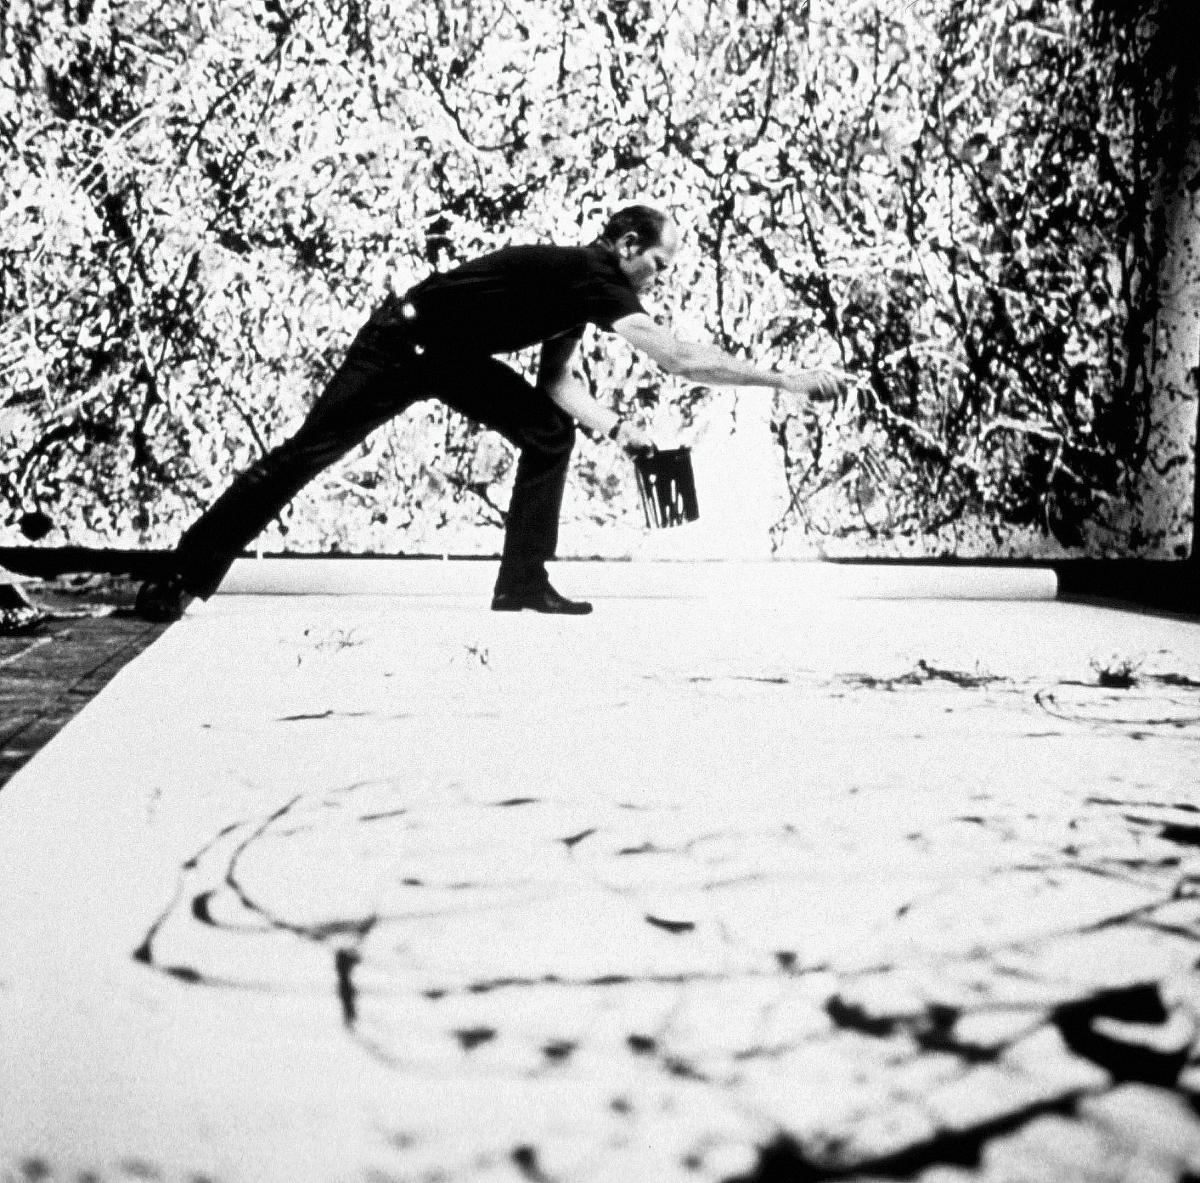 black and white photograph of a man standing over a canvas on the floor, splashing paint onto it